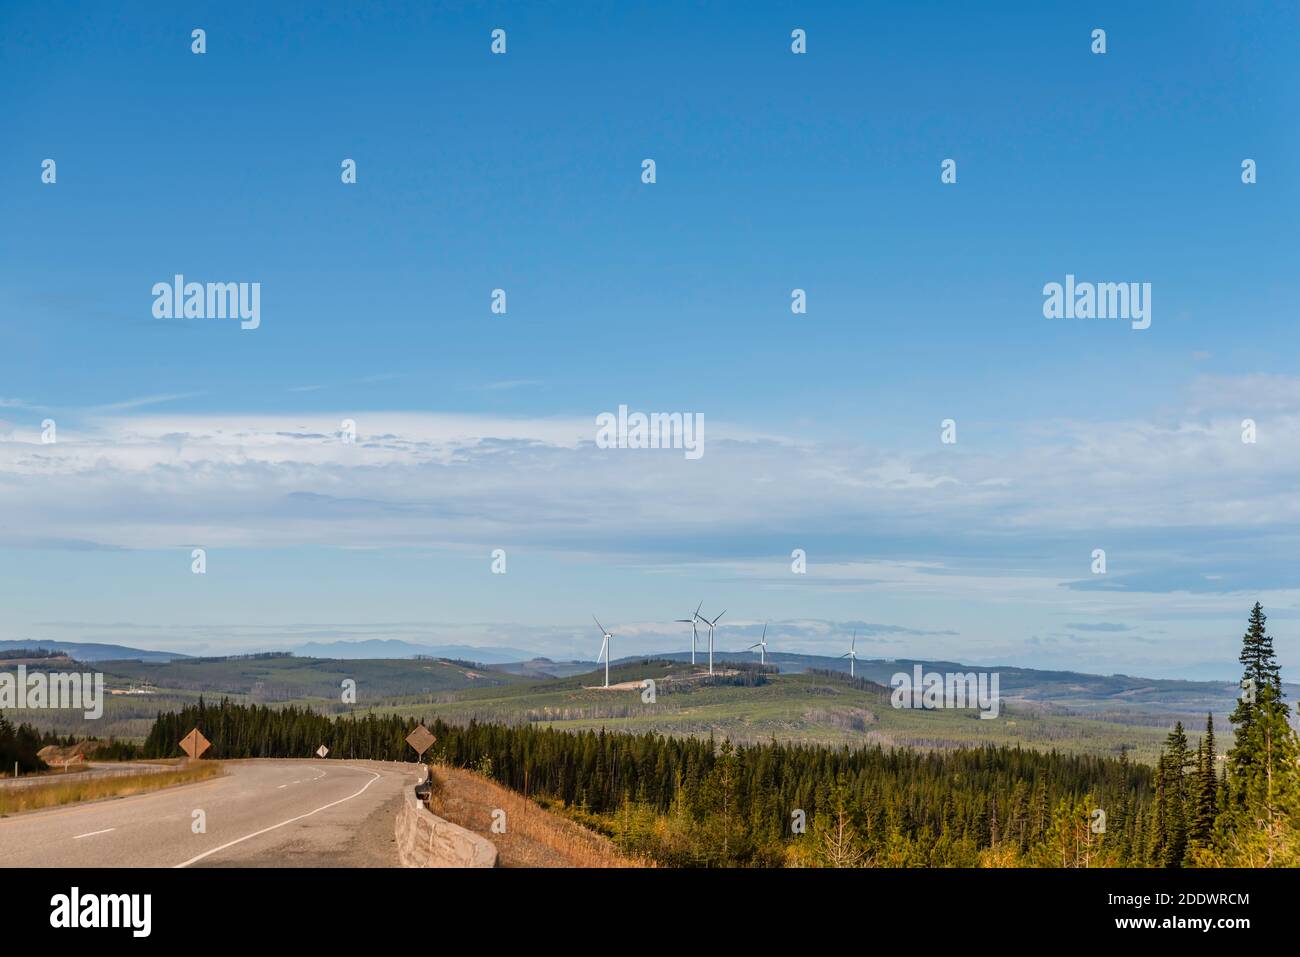 The view from the highway to the wind farms located on the hills covered with grass and trees. Cars are moving along the highway. Blue sky with clouds Stock Photo